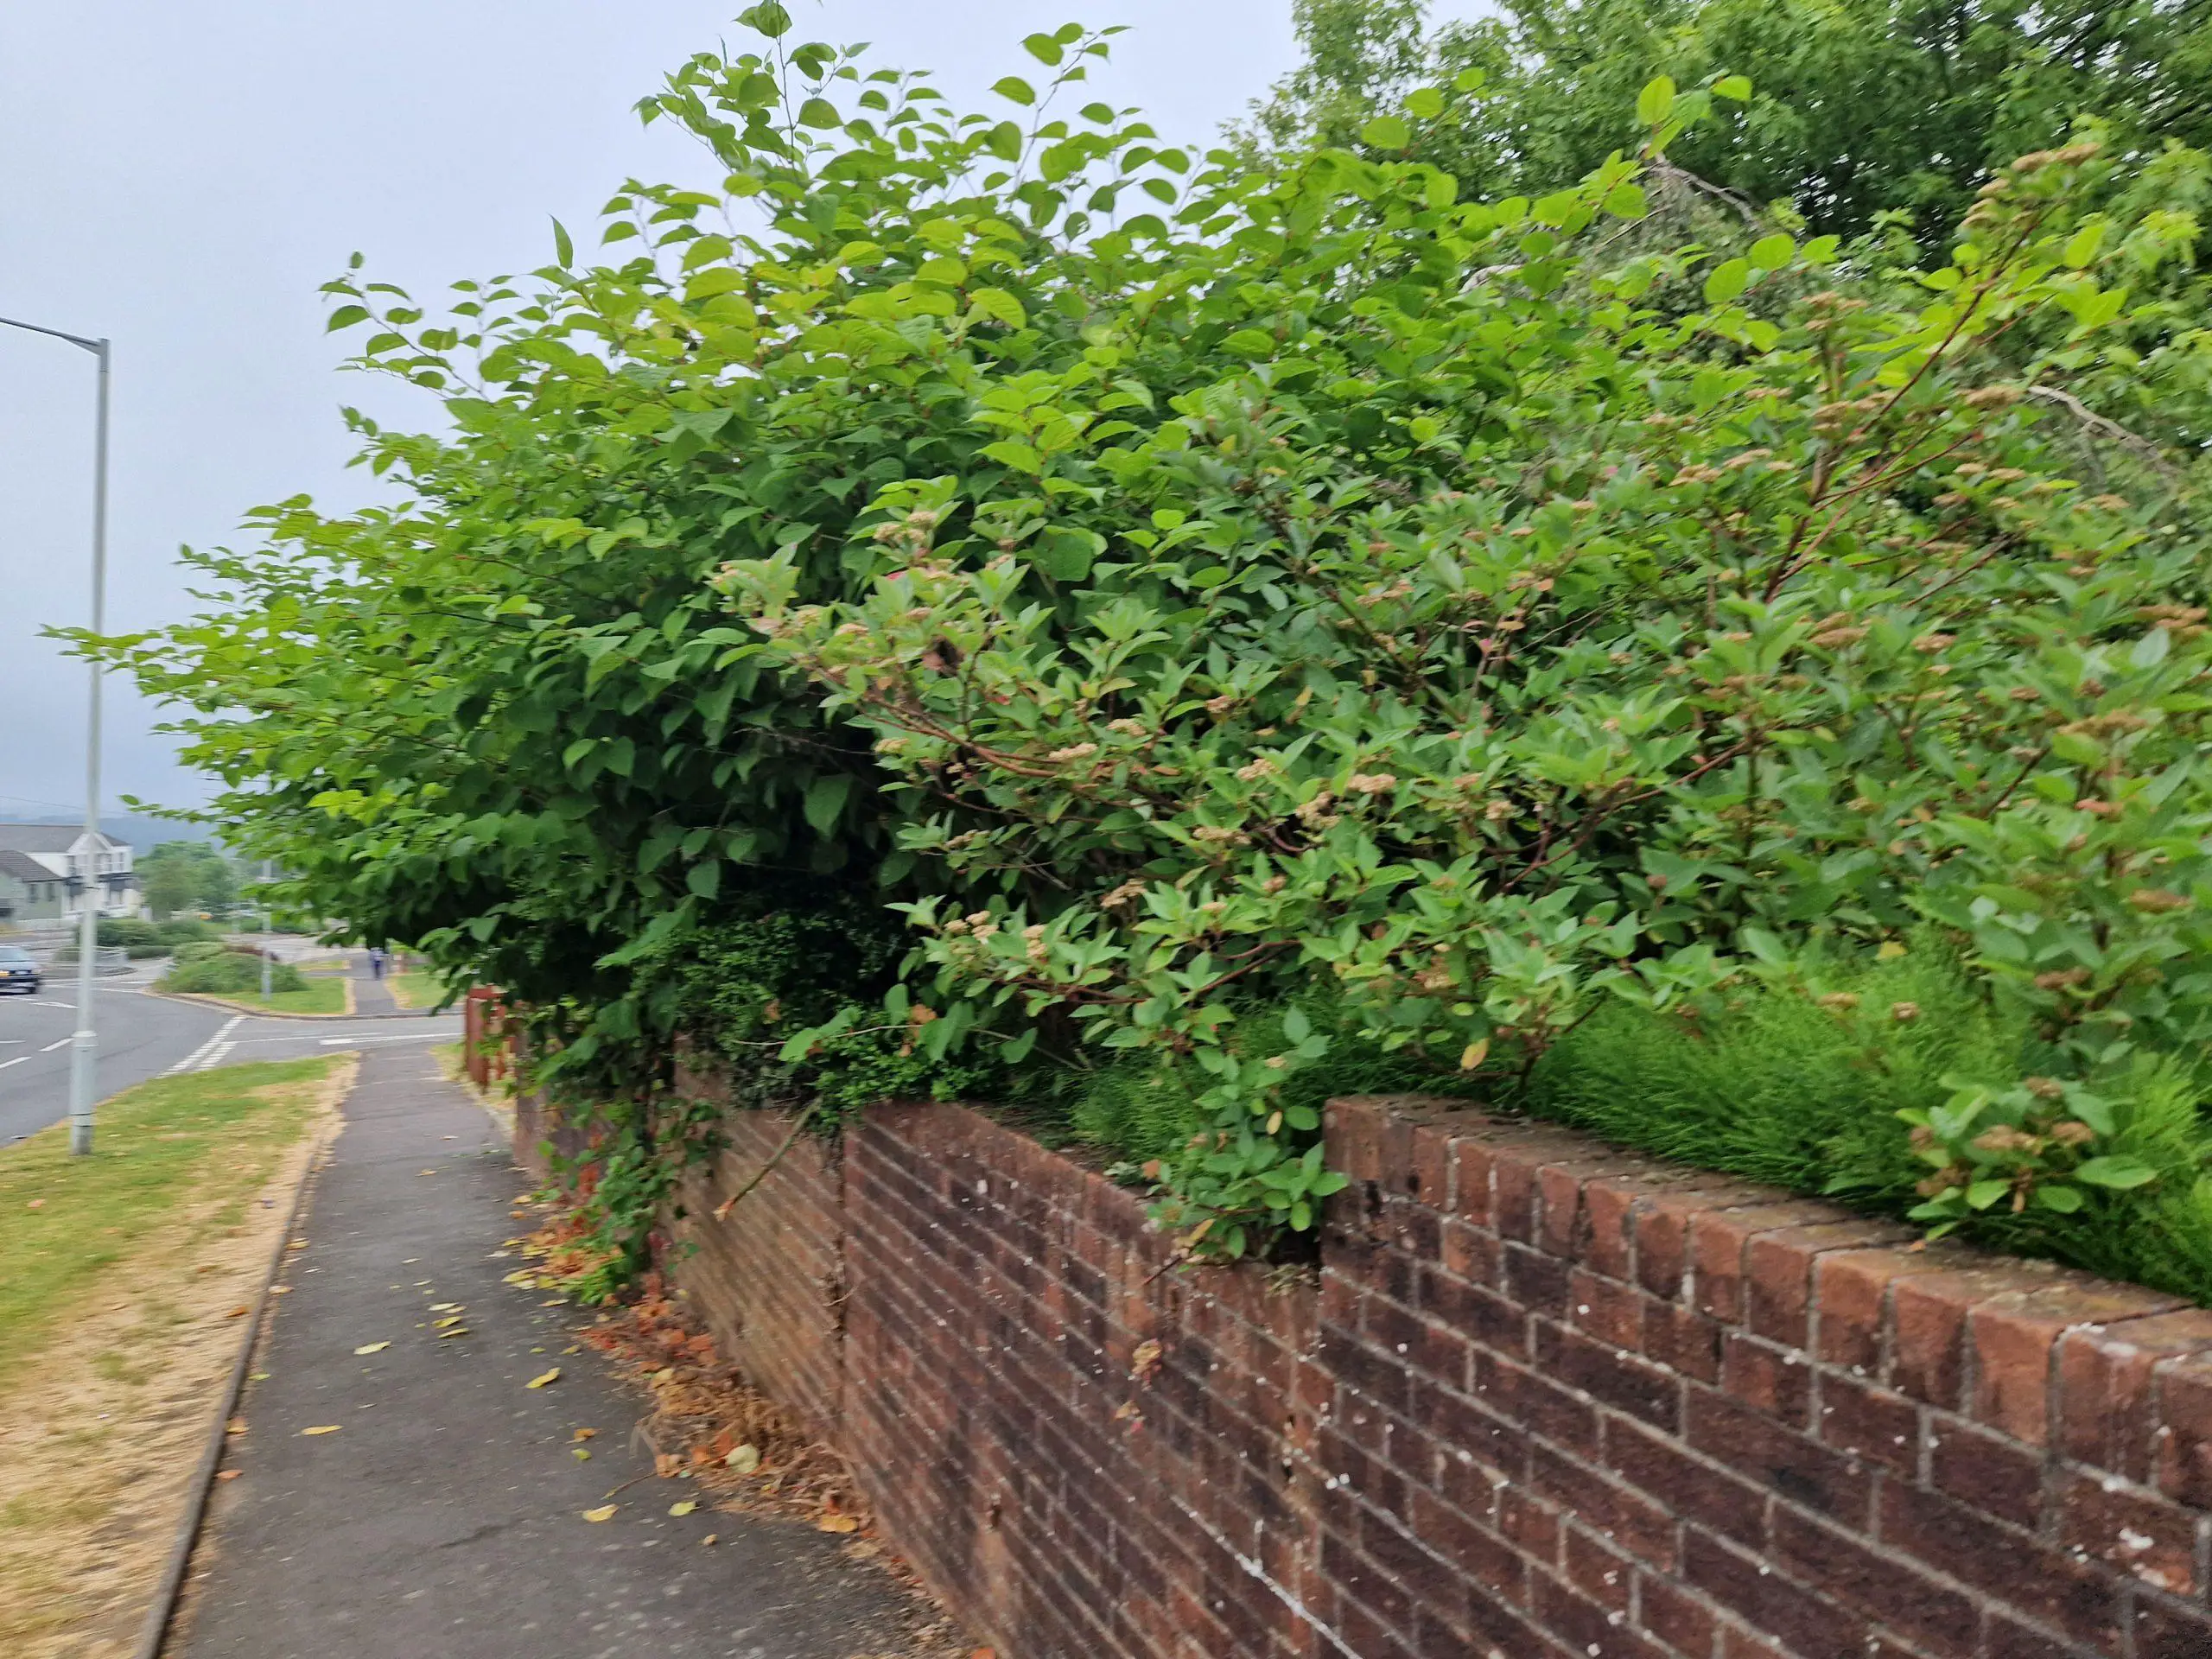 Japanese knotweed consuming ground all the way to the edge of a boundary